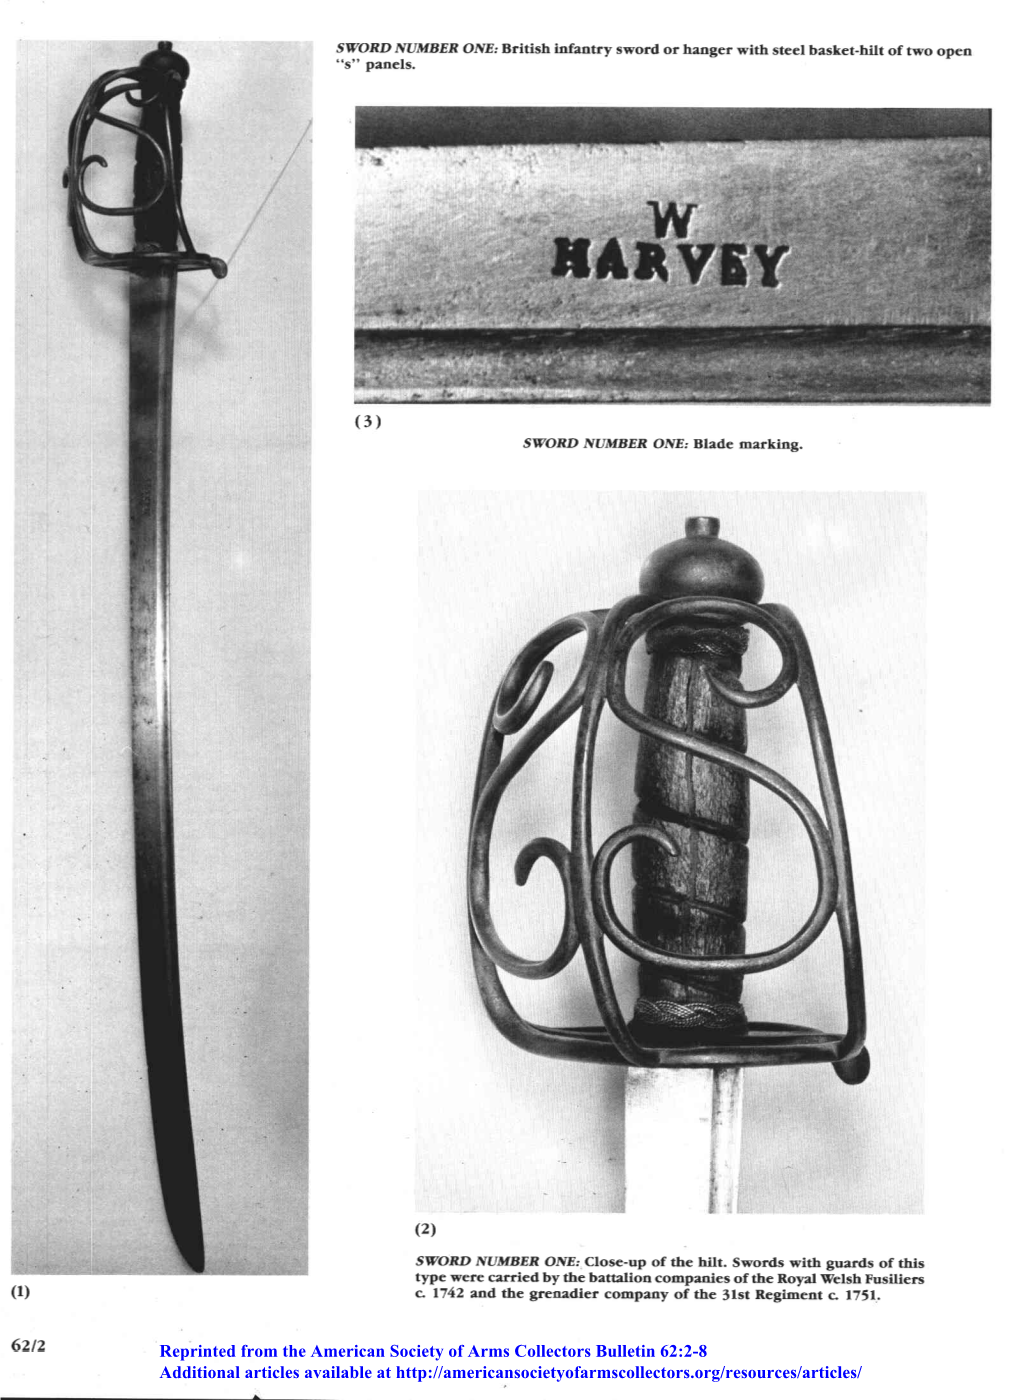 Mid-18Th Century British Military Swords with Open "S" Paneled Guards: an Update Anthony D